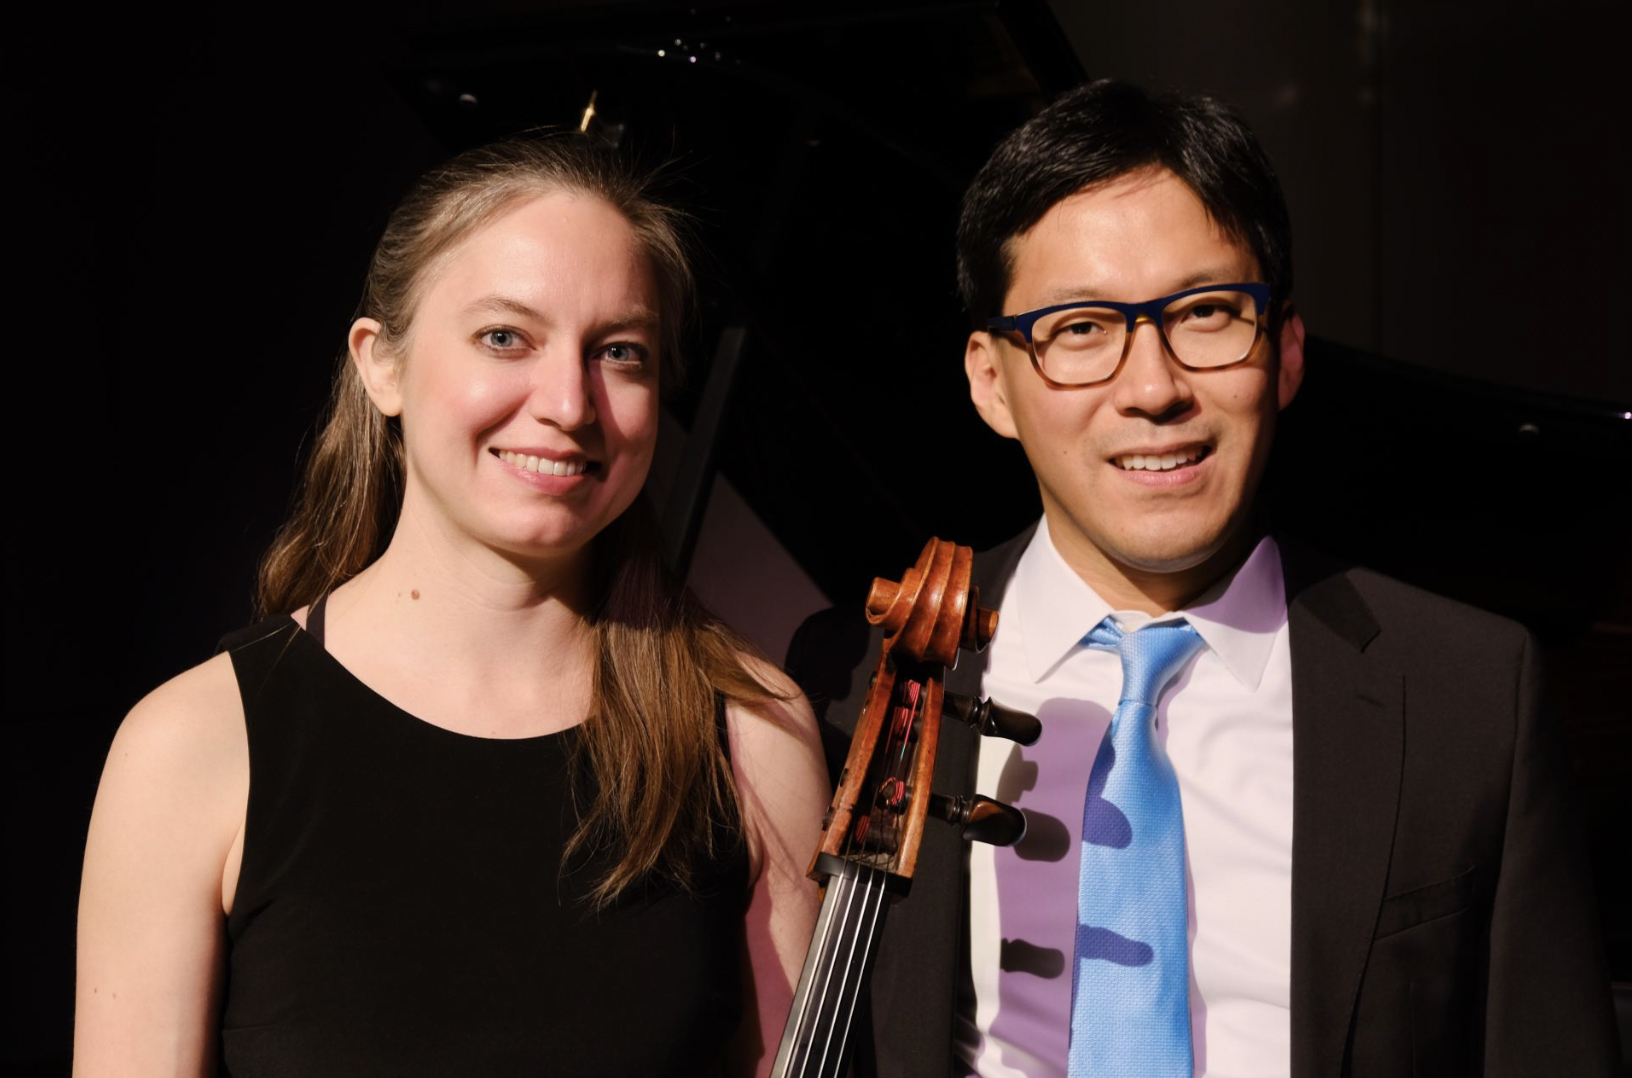 A woman wearing a black top and a man with glasses in a suit with a light blue tie smile at the camera. The neck of a cello is between them.